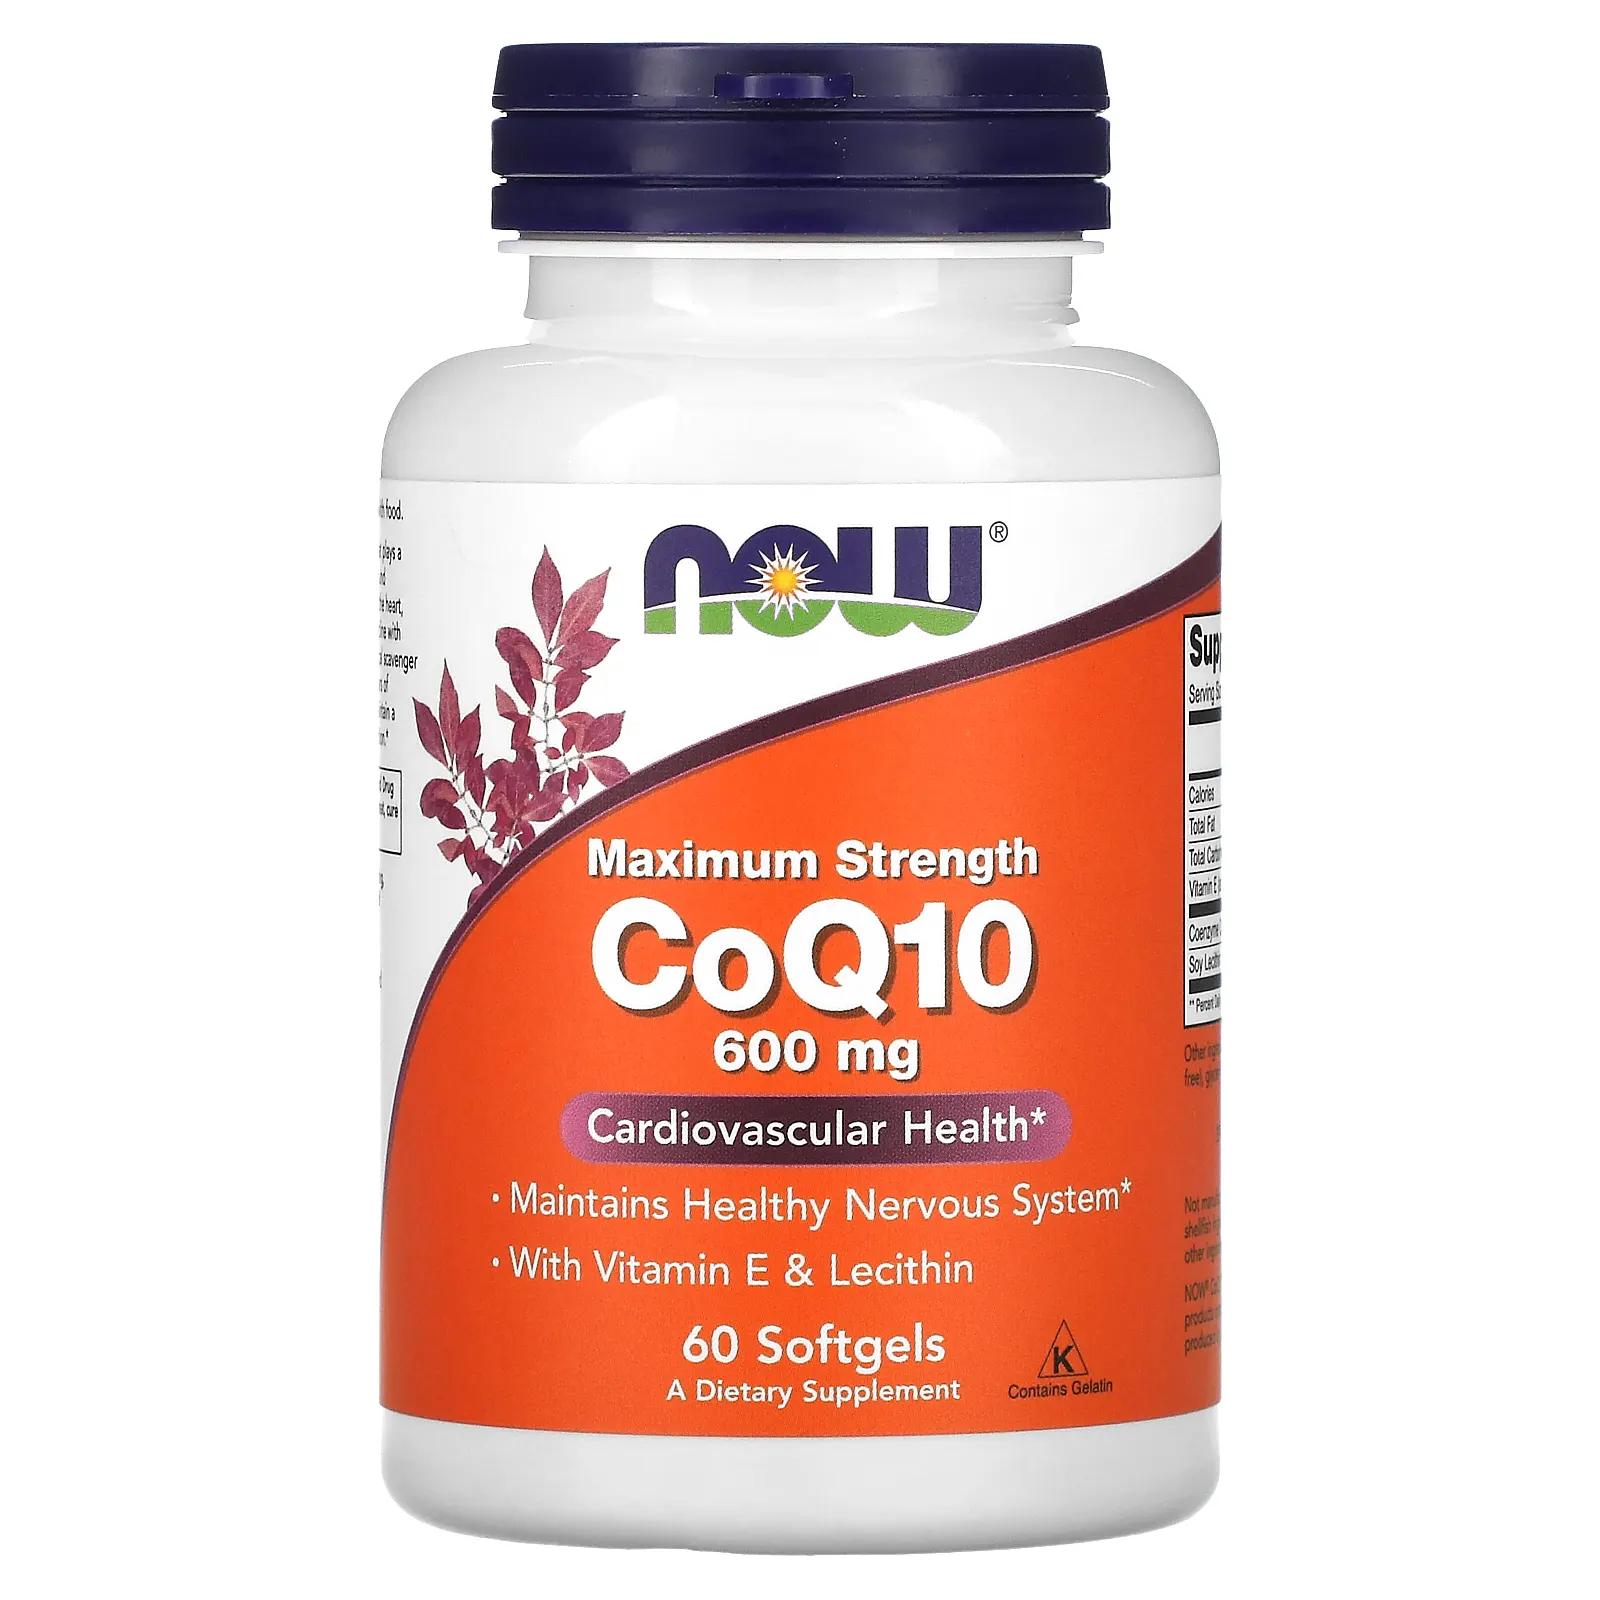 life extension super ubiquinol coq10 with enhanced mitochondrial support 100 mg 60 softgels Now Foods CoQ10 With Vitamin E & Lecithin 600 mg 60 Softgels